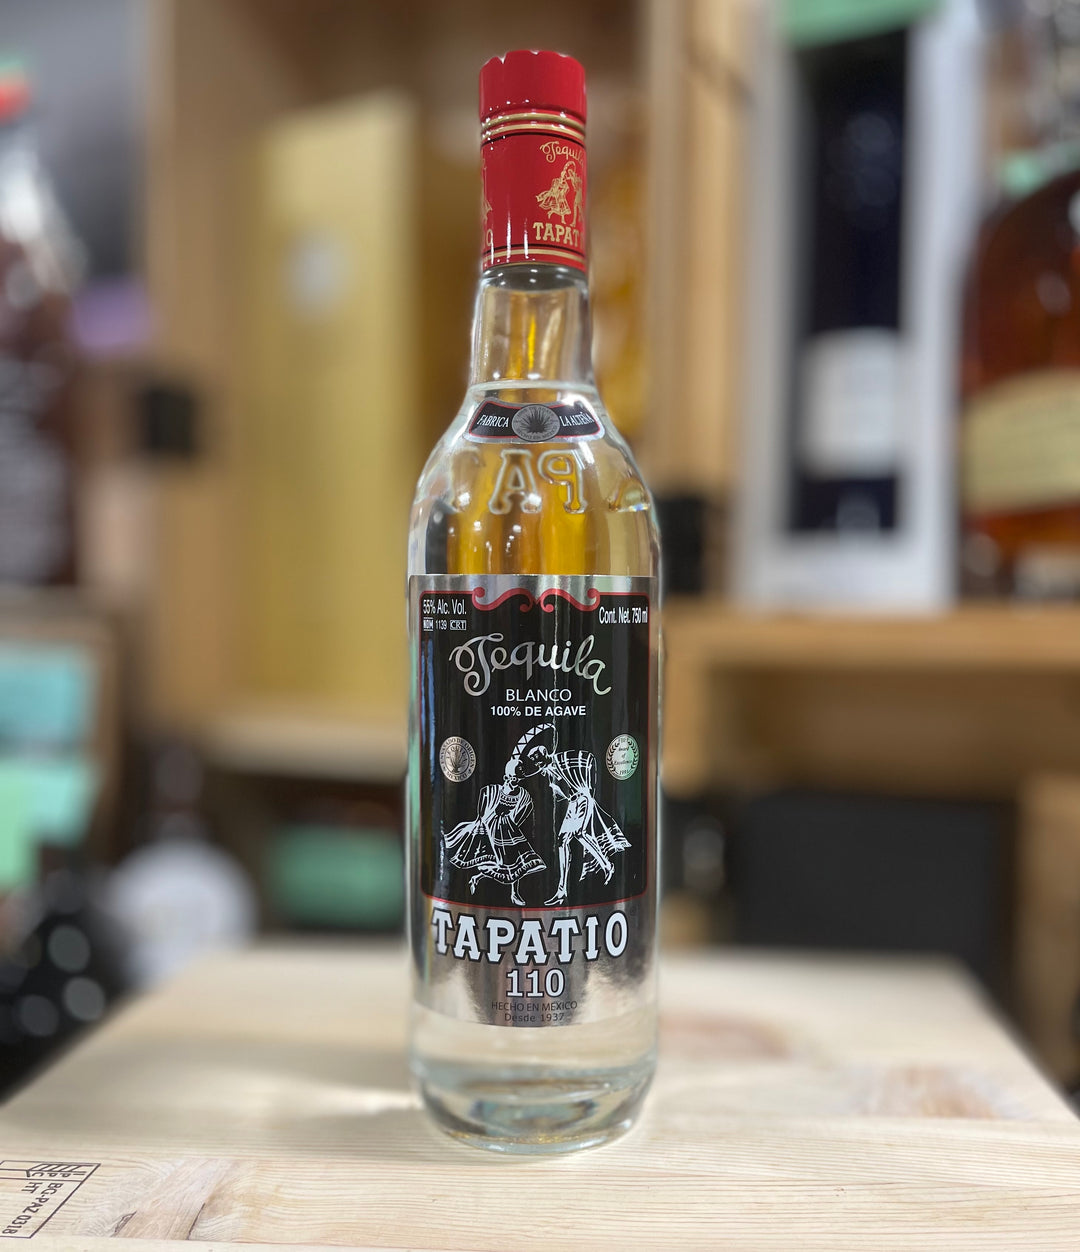 Tapatio Tequila Blanco 110 Proof Jalisco, Mexico